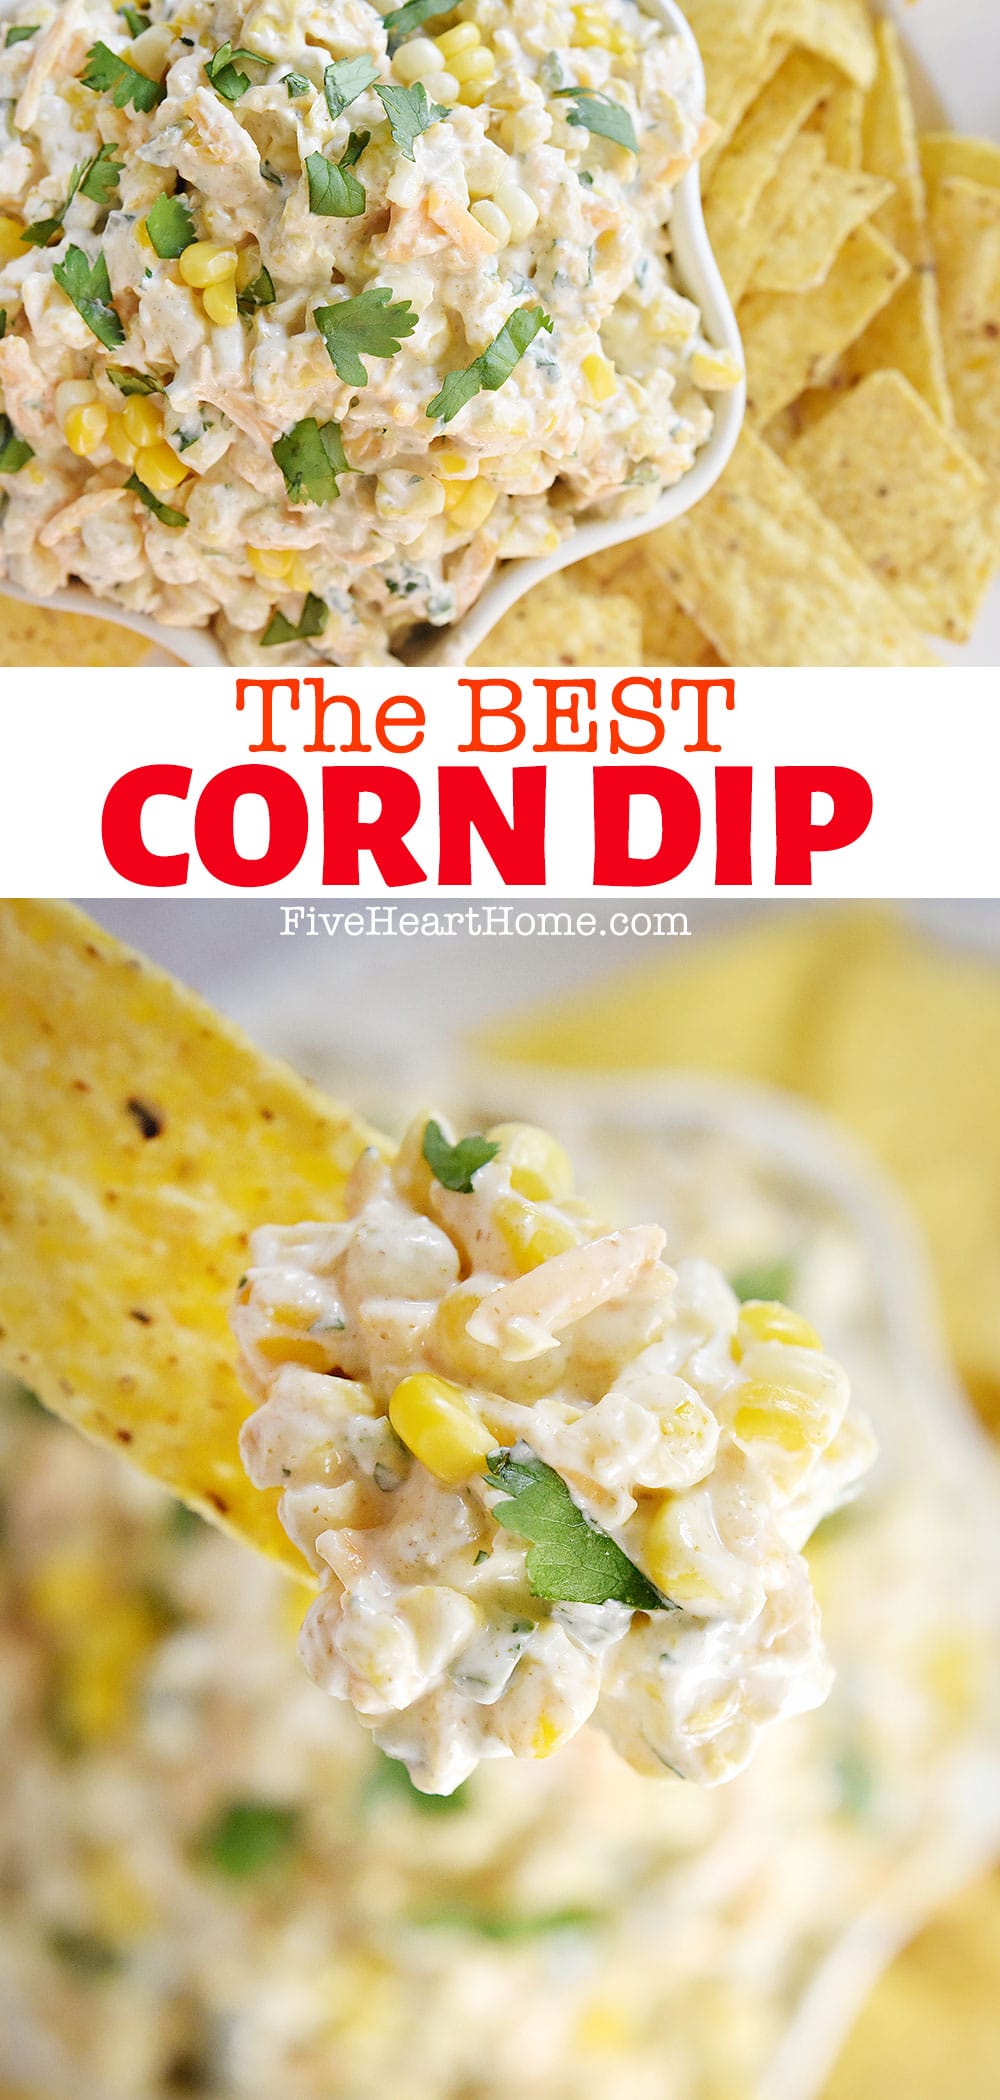 The BEST Corn Dip ~ a creamy, cheesy dip featuring sweet corn and laced with Tex-Mex flavors including cumin, a touch of jalapeño, and fresh cilantro. Perfect for summer parties, tailgating, or year-round entertaining, this corn dip recipe can be made with fresh corn, frozen corn, or even canned corn! | FiveHeartHome.com via @fivehearthome